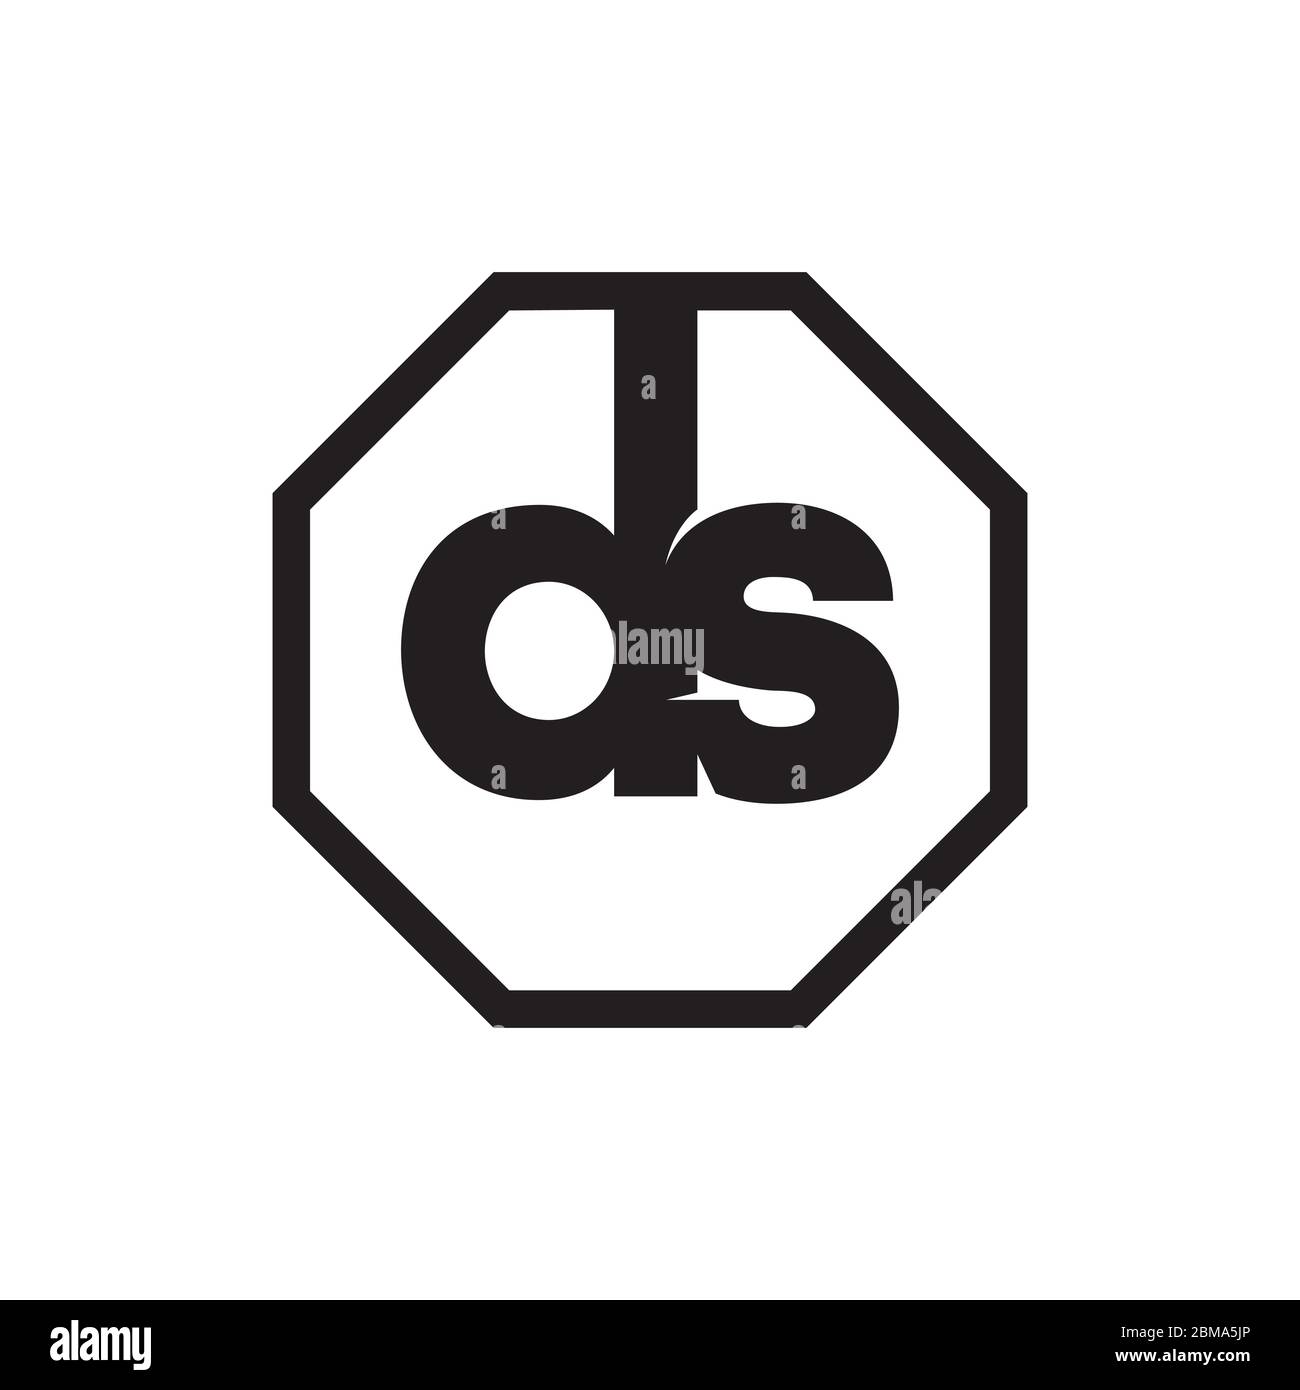 Ds logo design Cut Out Stock Images & Pictures - Alamy